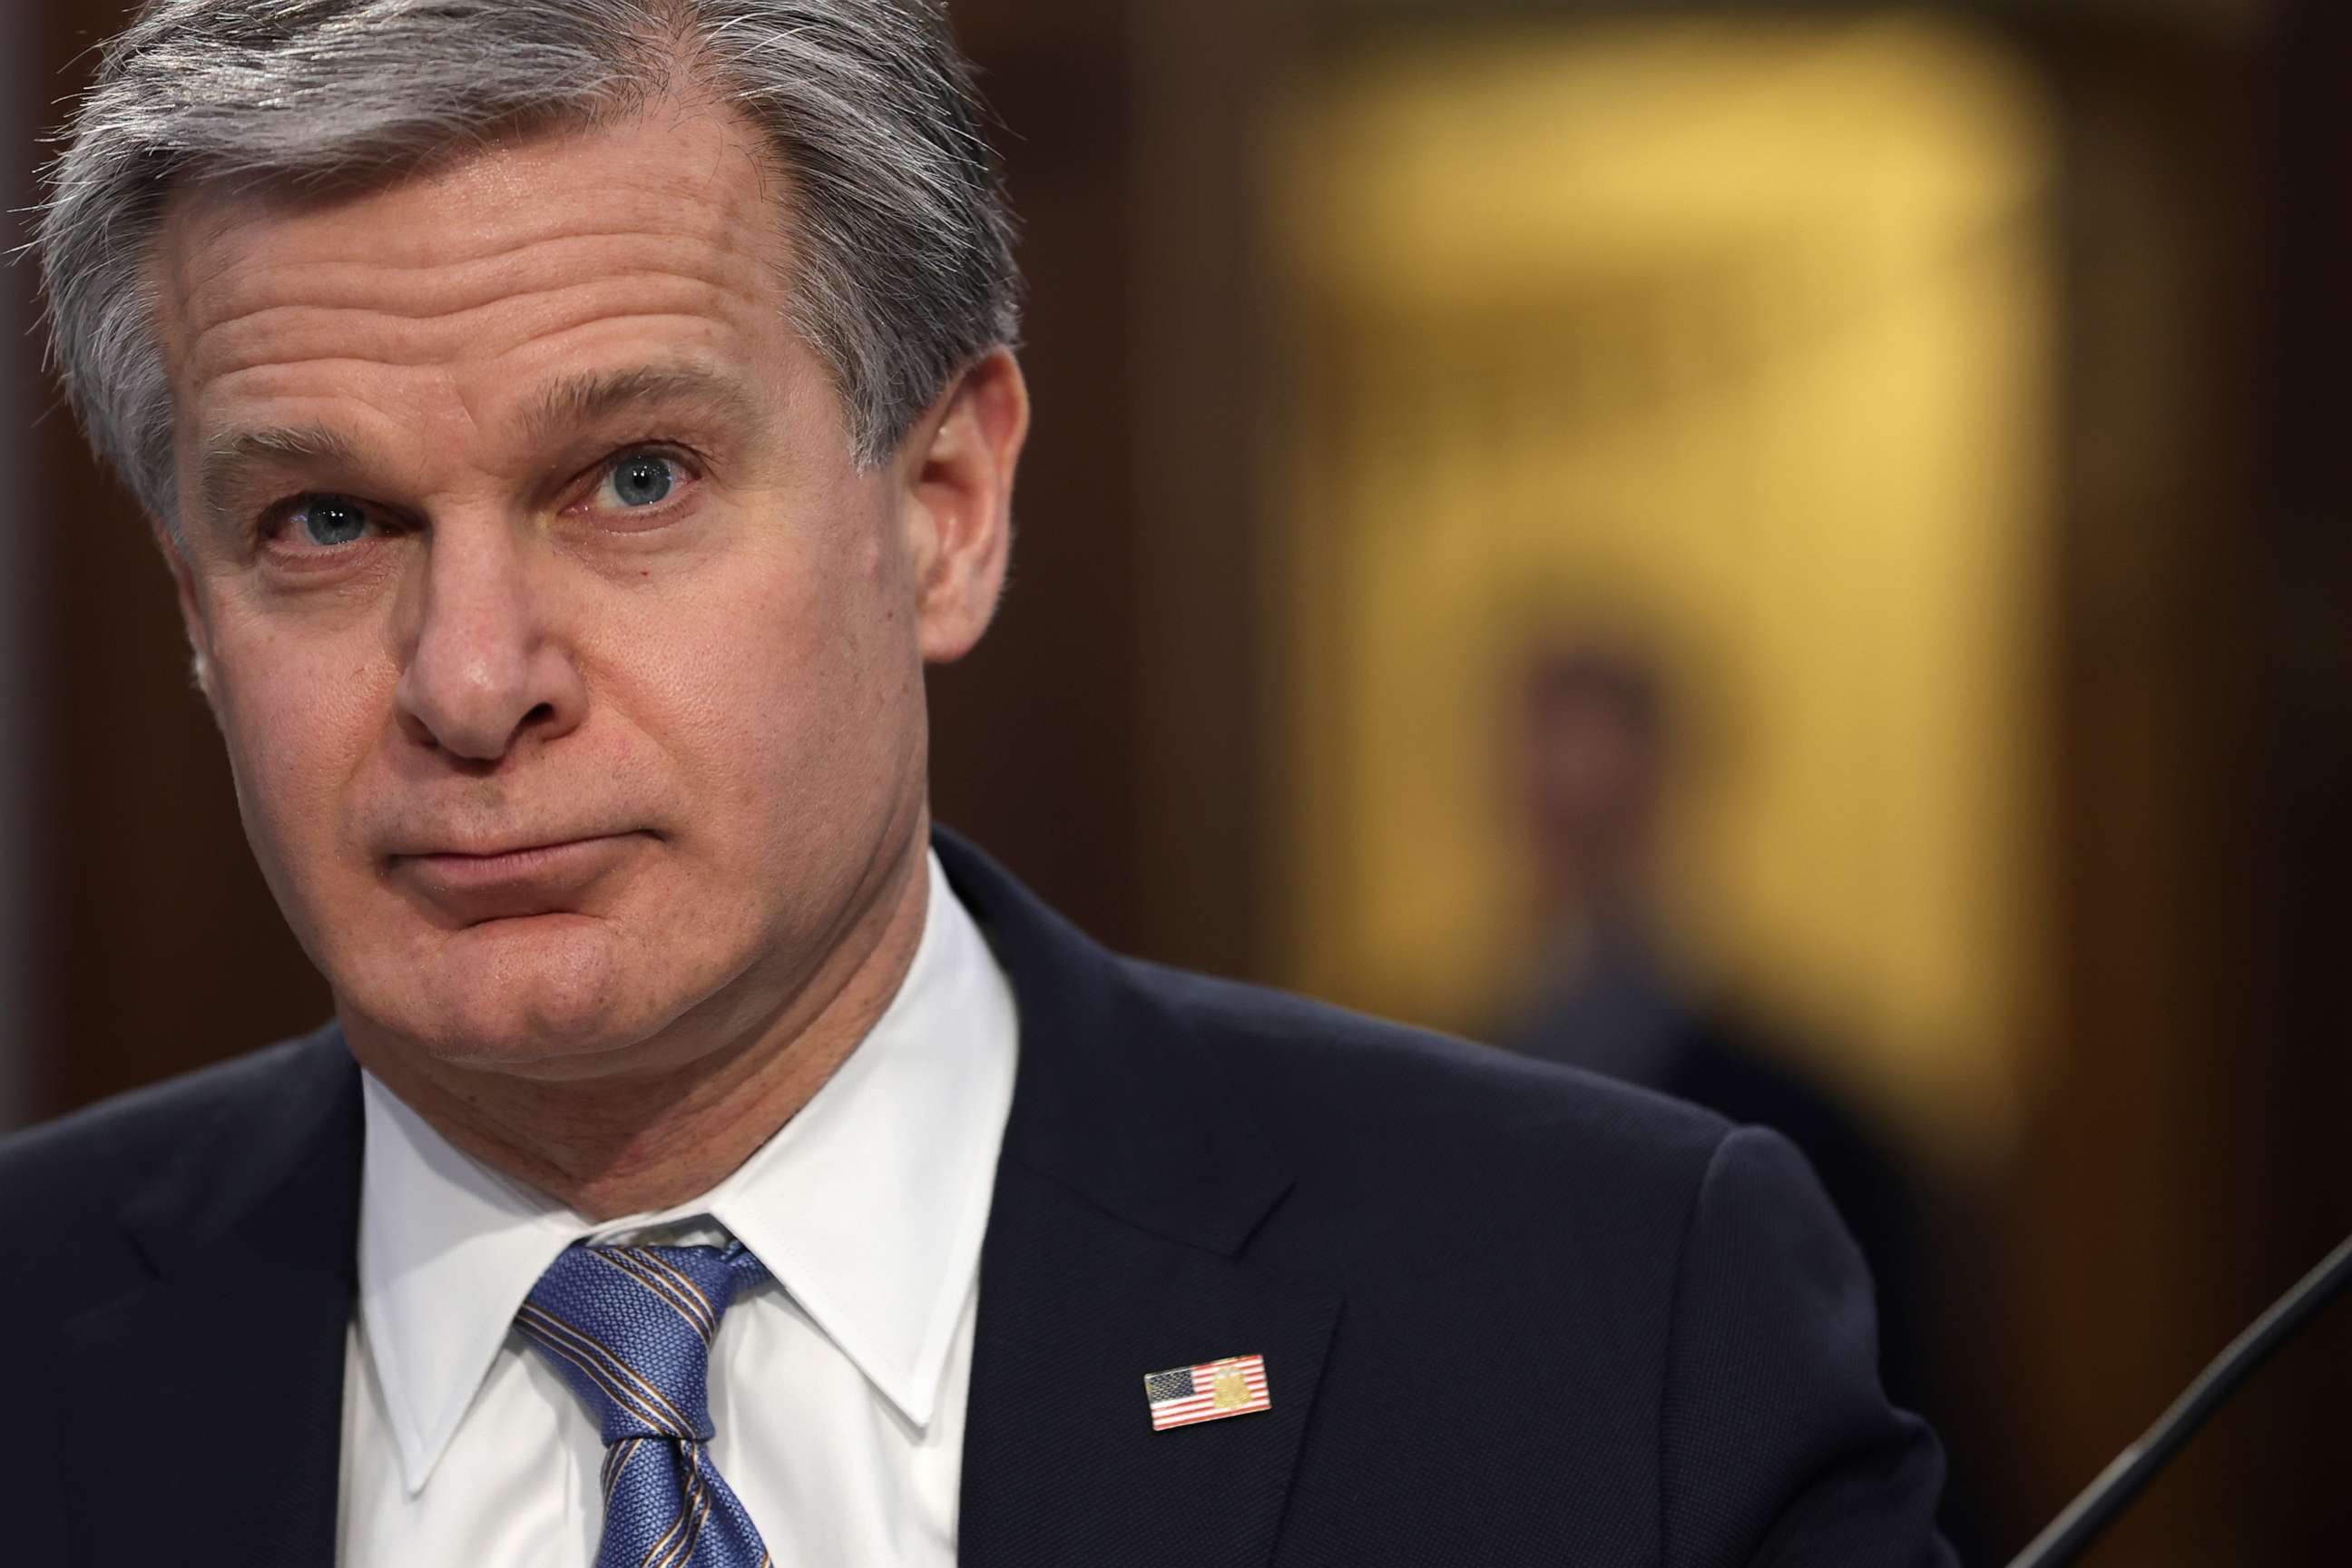 PHOTO: FBI Director Christopher Wray testifies during a hearing before the Commerce, Justice, Science, and Related Agencies Subcommittee of the House Appropriations Committee on Capitol Hill April 27, 2023 in Washington, D.C.